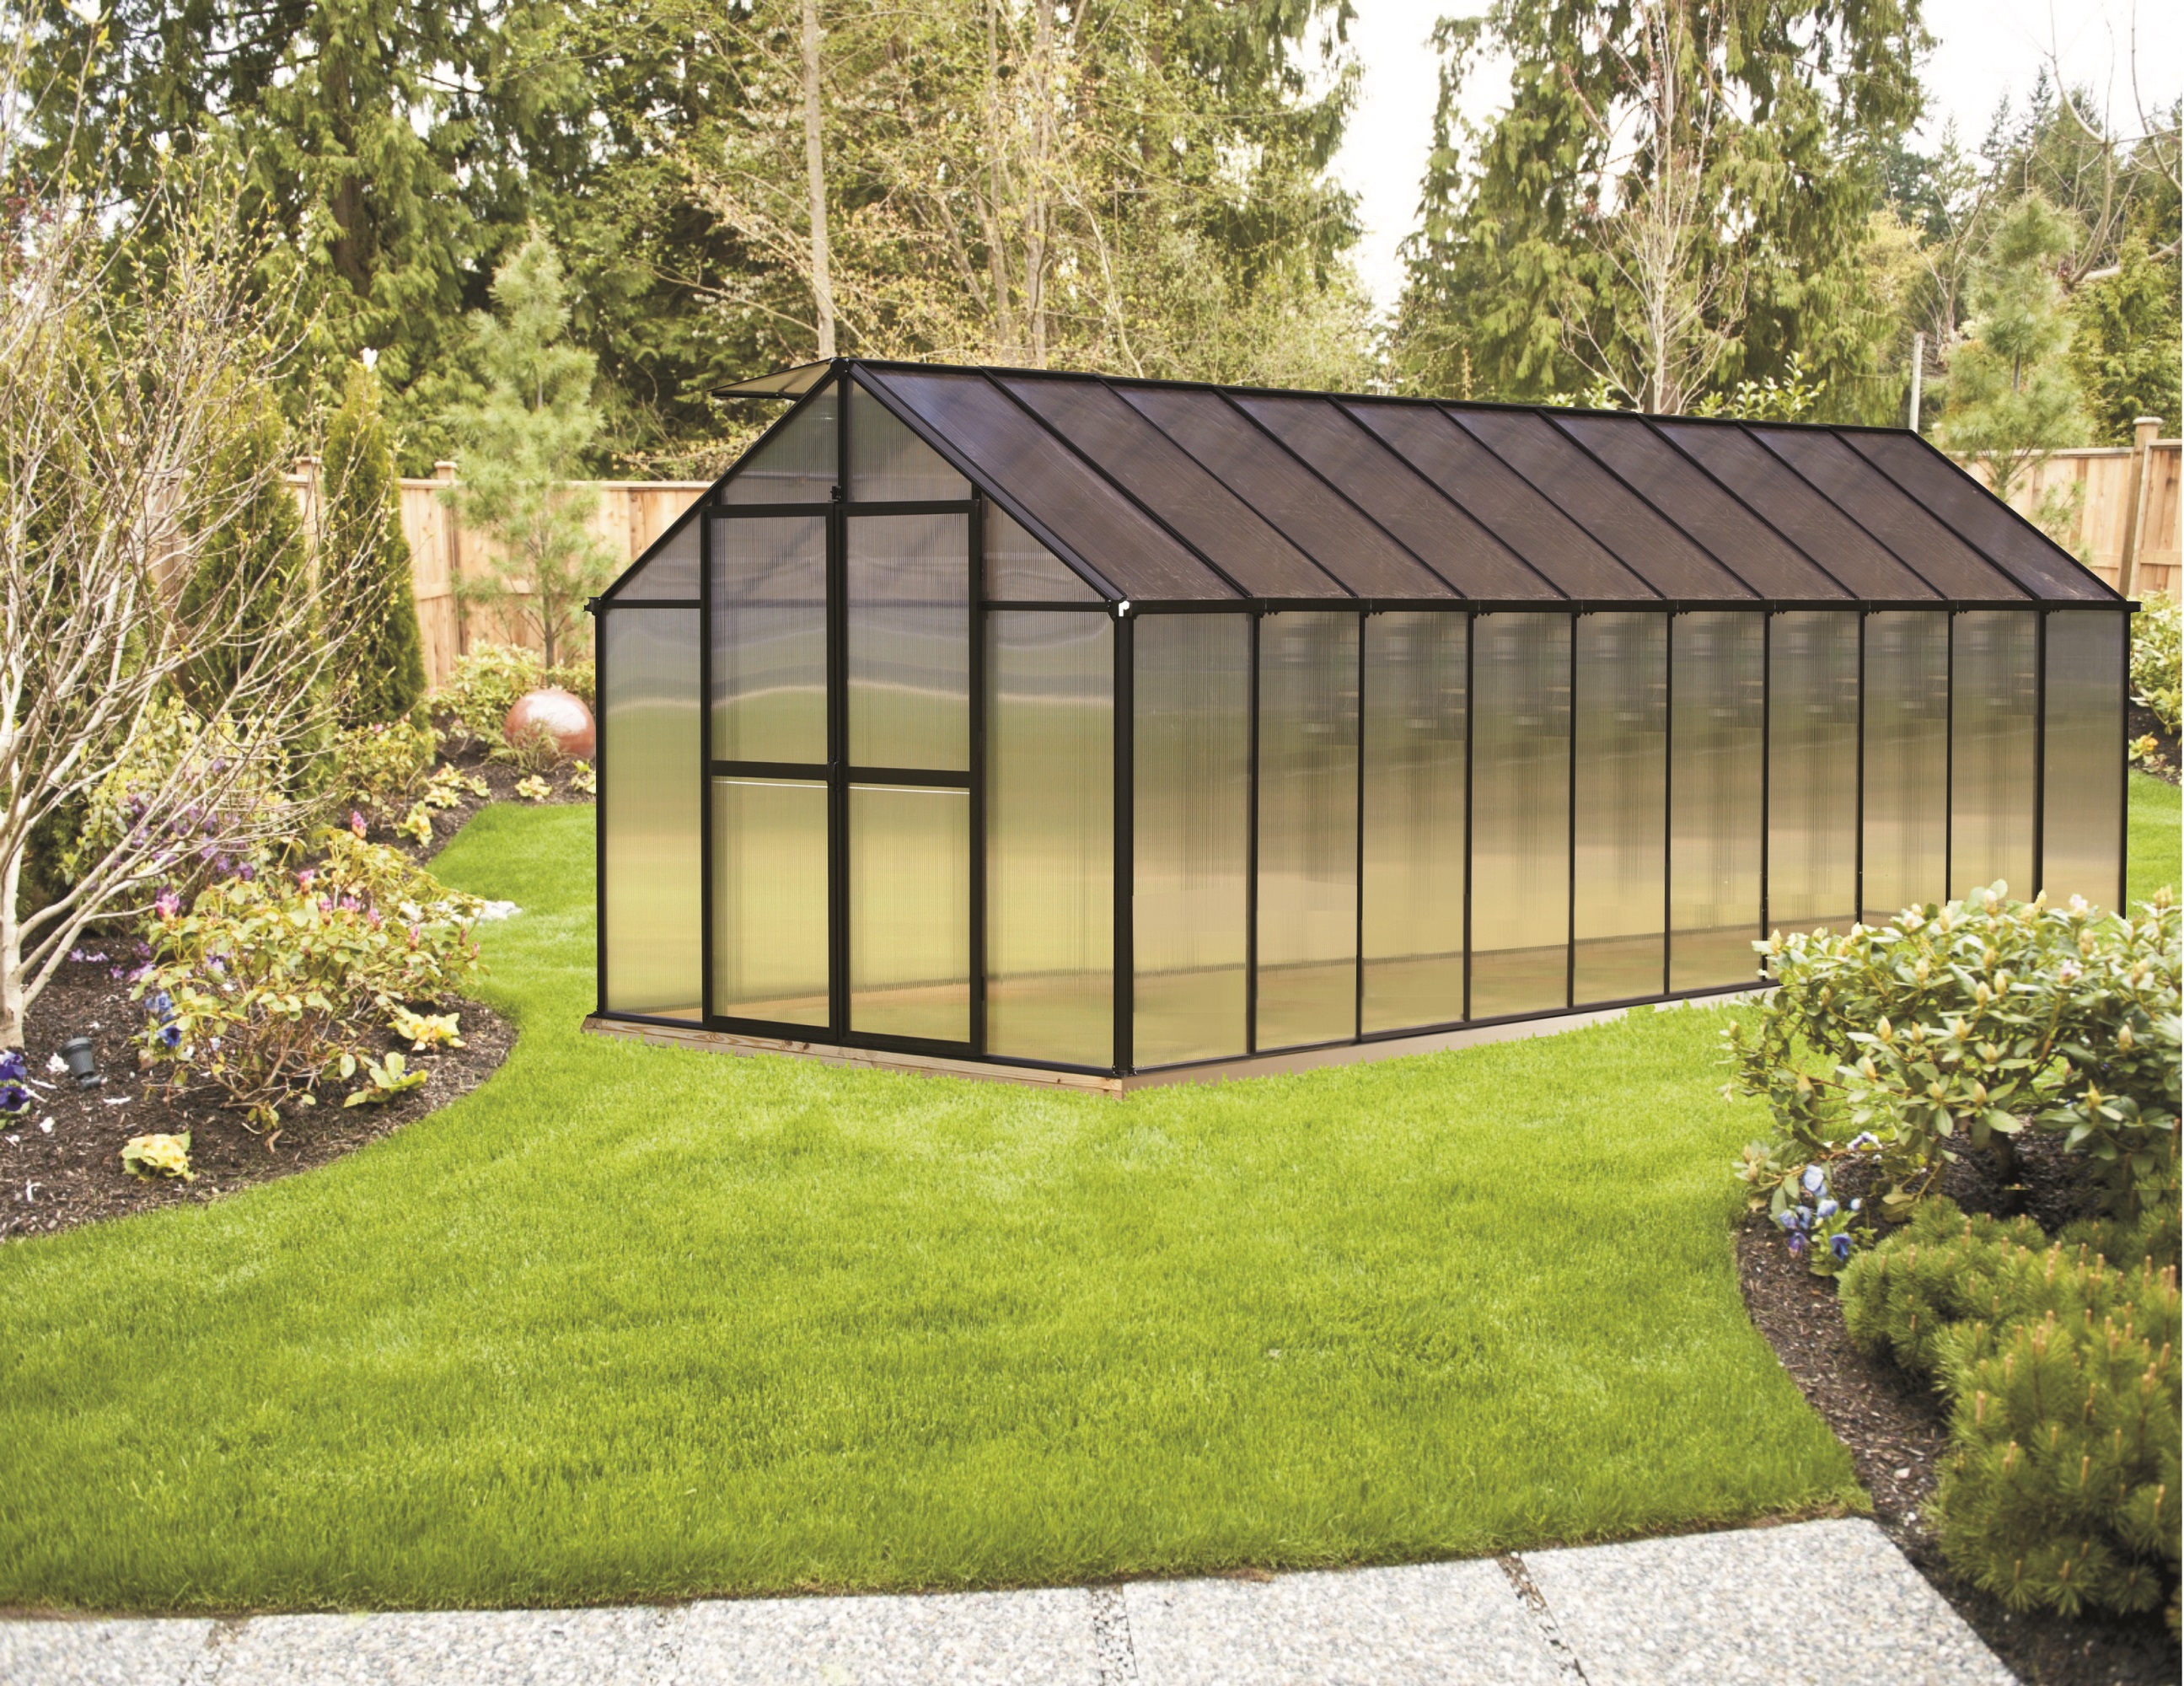 Picture of Riverstone Industries Monticello MONT-20-BK 8 x 20 Ft. Black Greenhouse